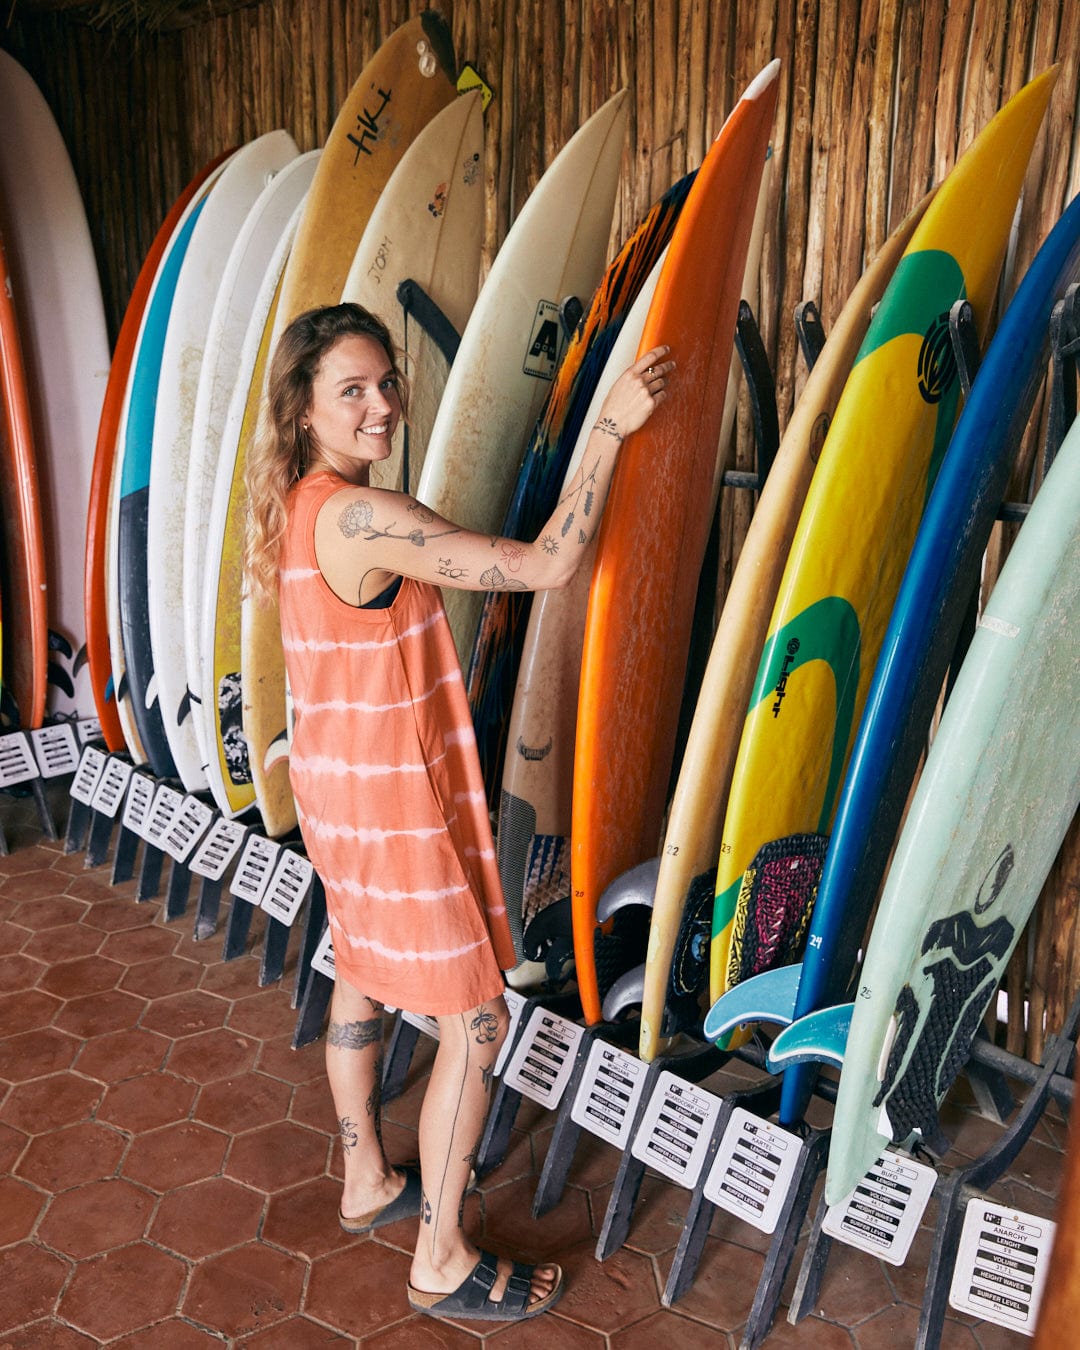 A person wearing an Eliana - Womens Tie Dye Vest Dress - Peach from Saltrock and sandals smiles while standing next to a rack of surfboards, reaching for an orange one.